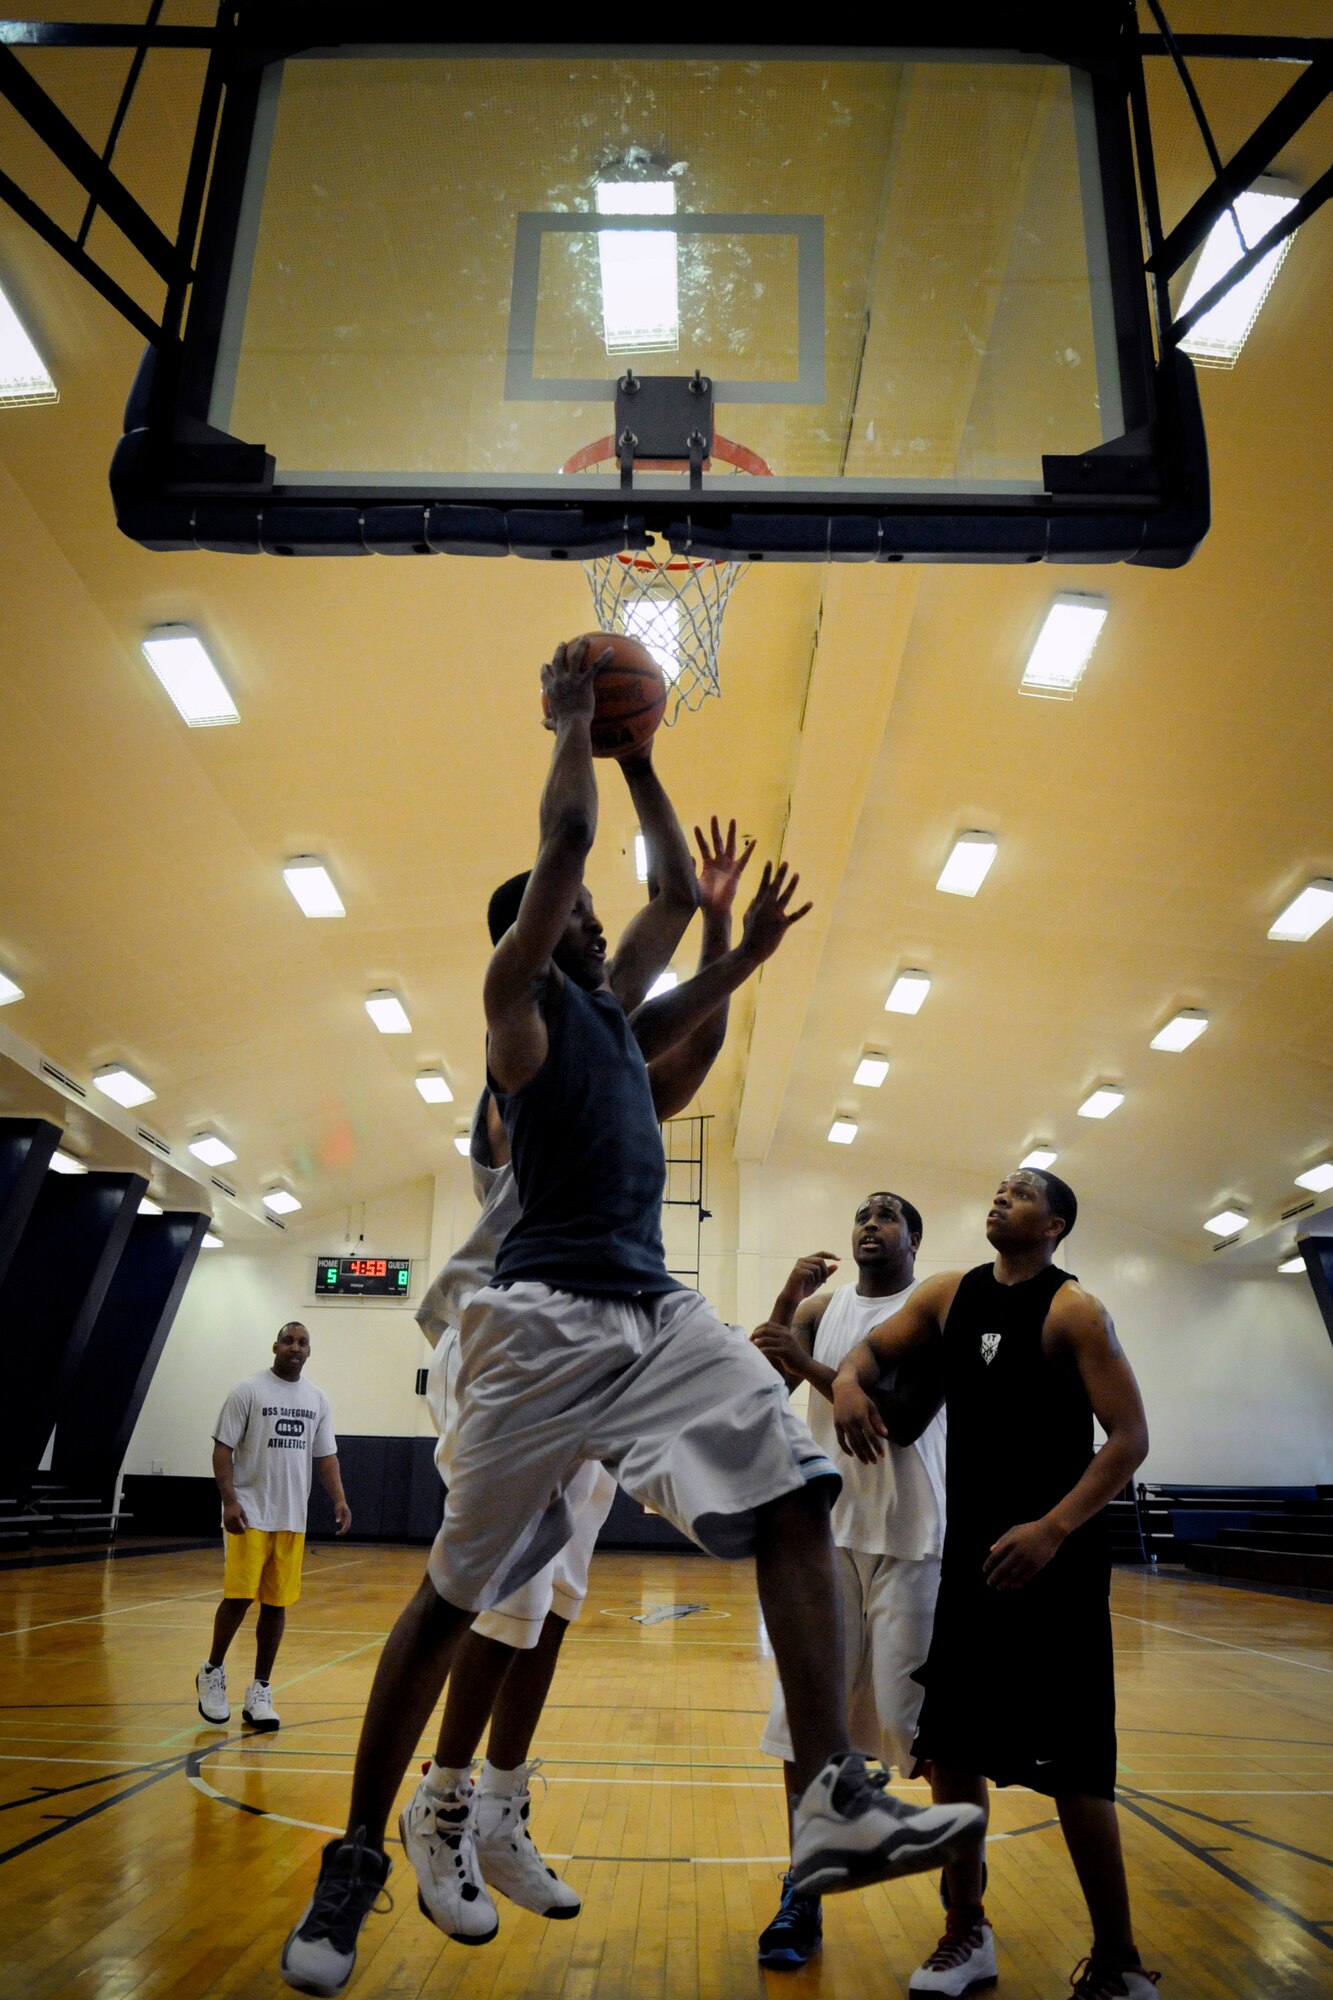 MISAWA AIR BASE, Japan -- Adam Griffith grabs a rebound during a 3-on-3 basketball tournament at the Potter Fitness Center May 27, 2009. Griffith's team finished the tournament in first place. (U.S. Air Force photo by Senior Airman Jamal D. Sutter)